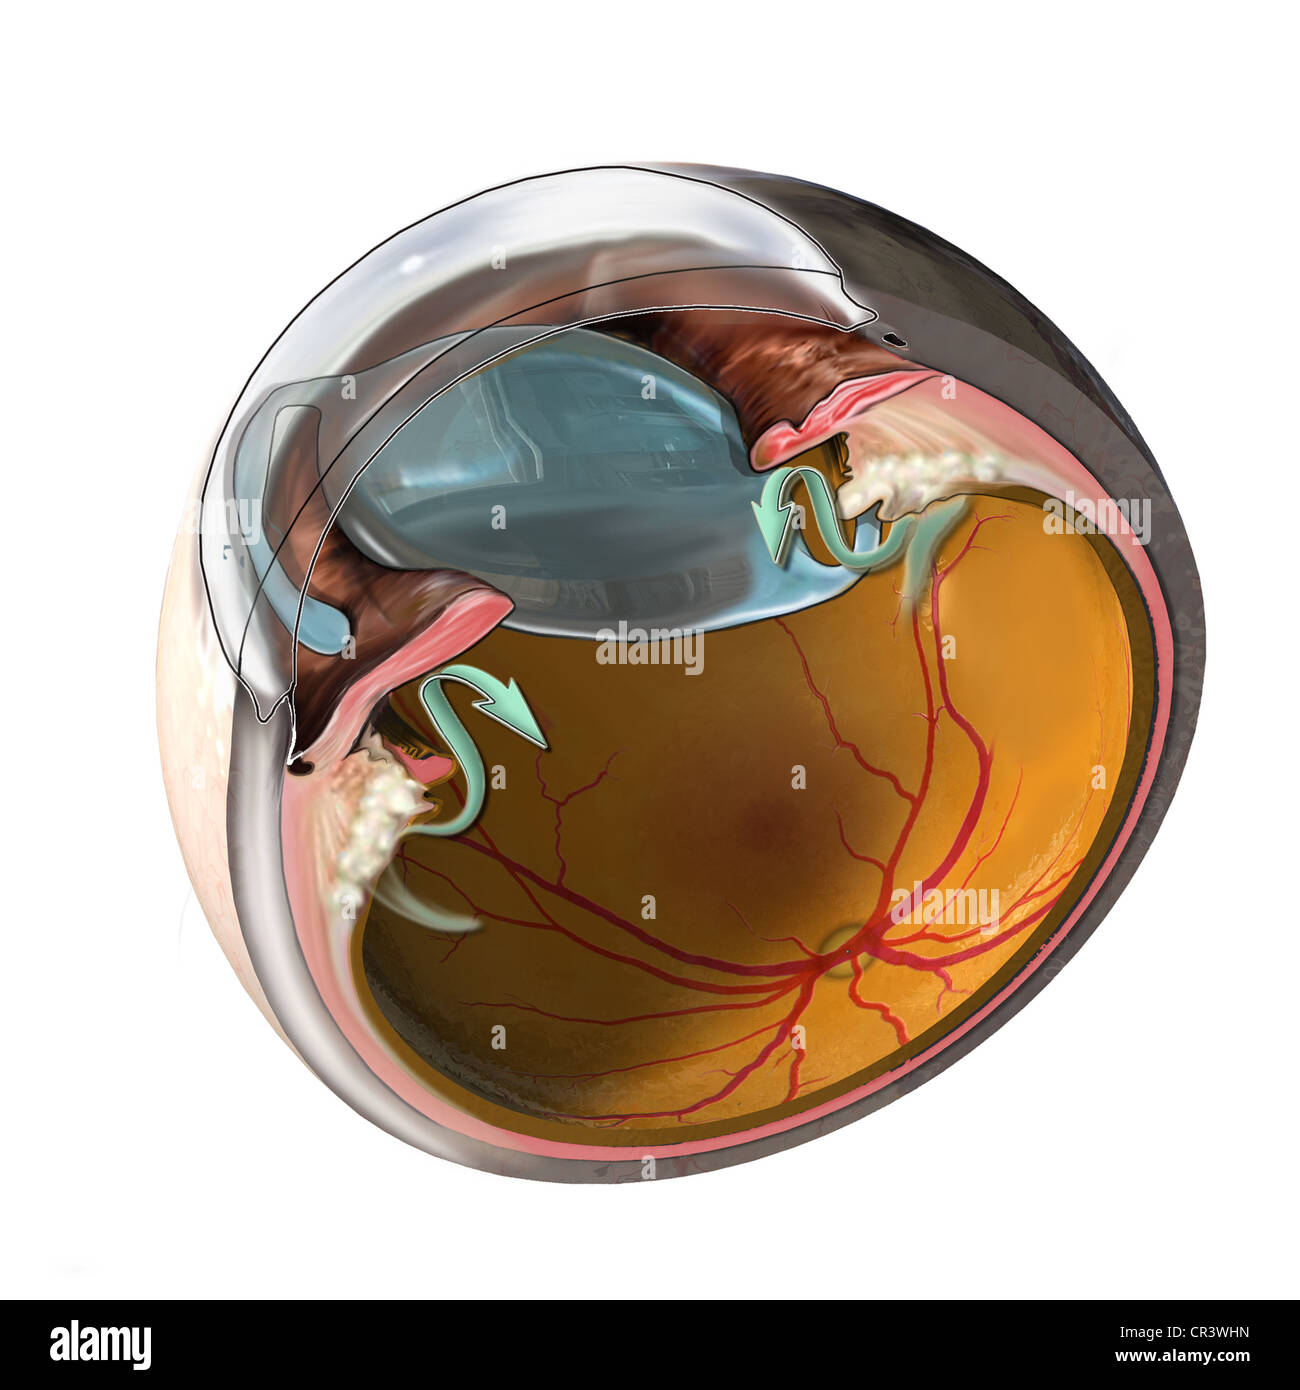 This medical exhibit features a cross section of the eye with a displaced intra-ocular lens. Stock Photo